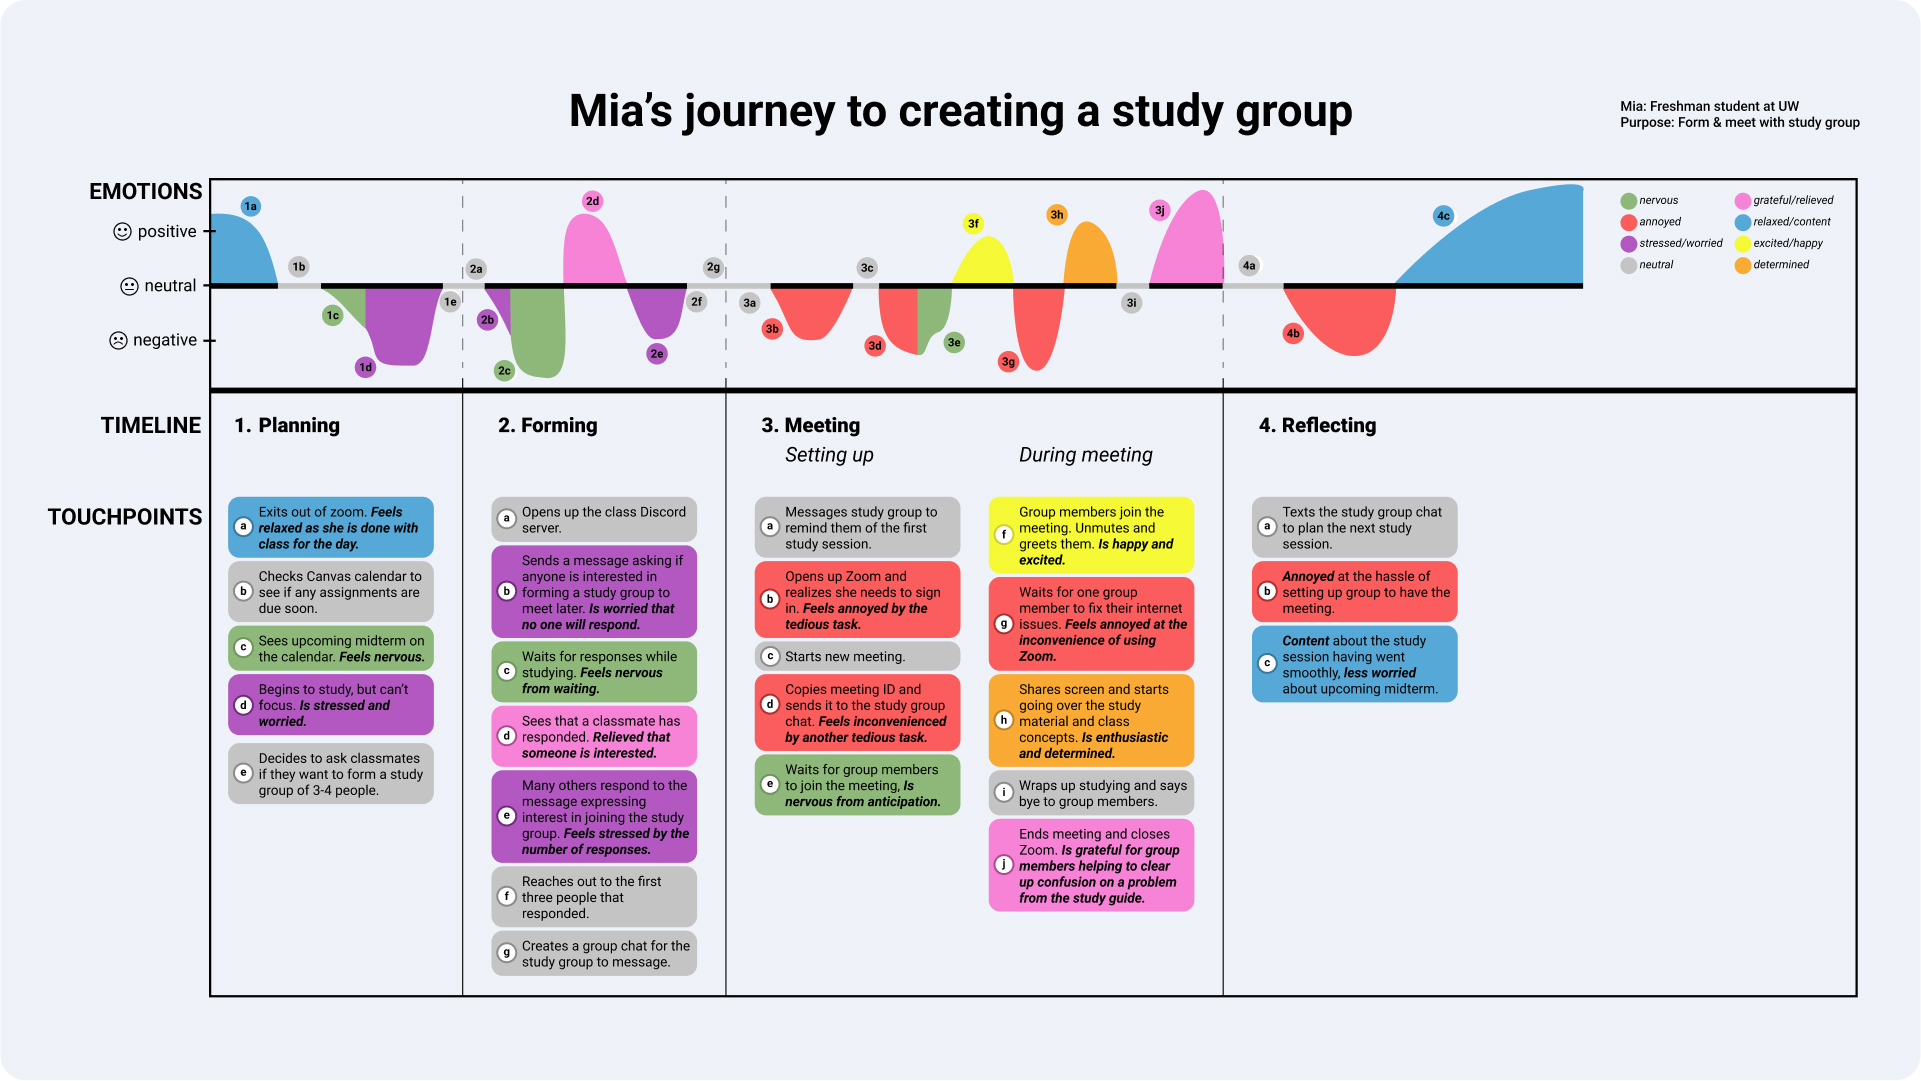 Mia's Journey Map to creating a study group